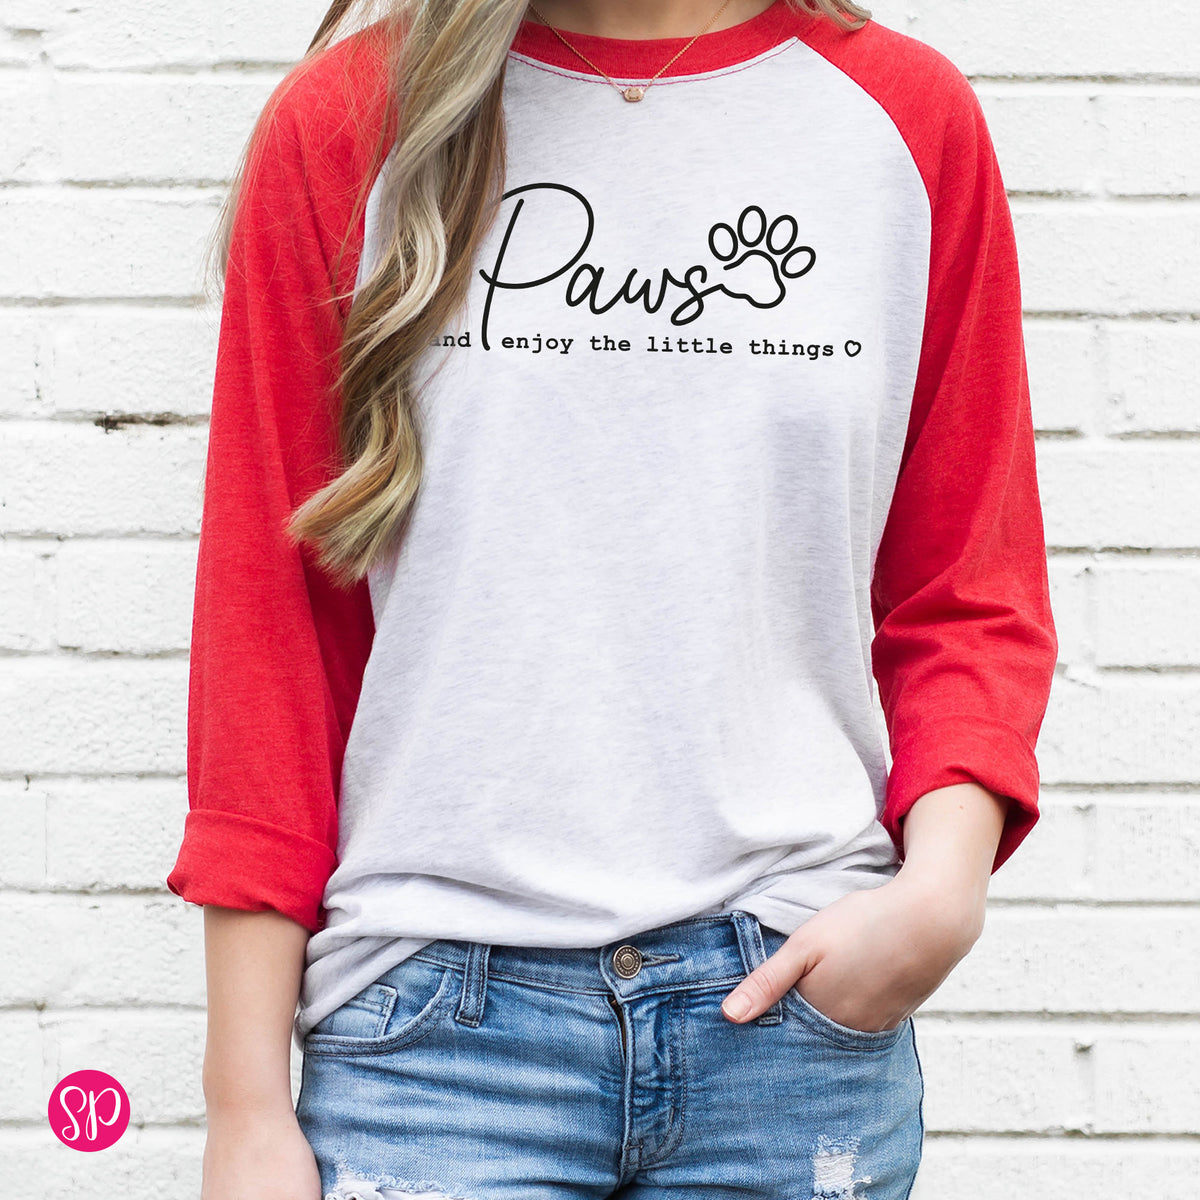 Paws and Enjoy the Little Things Raglan